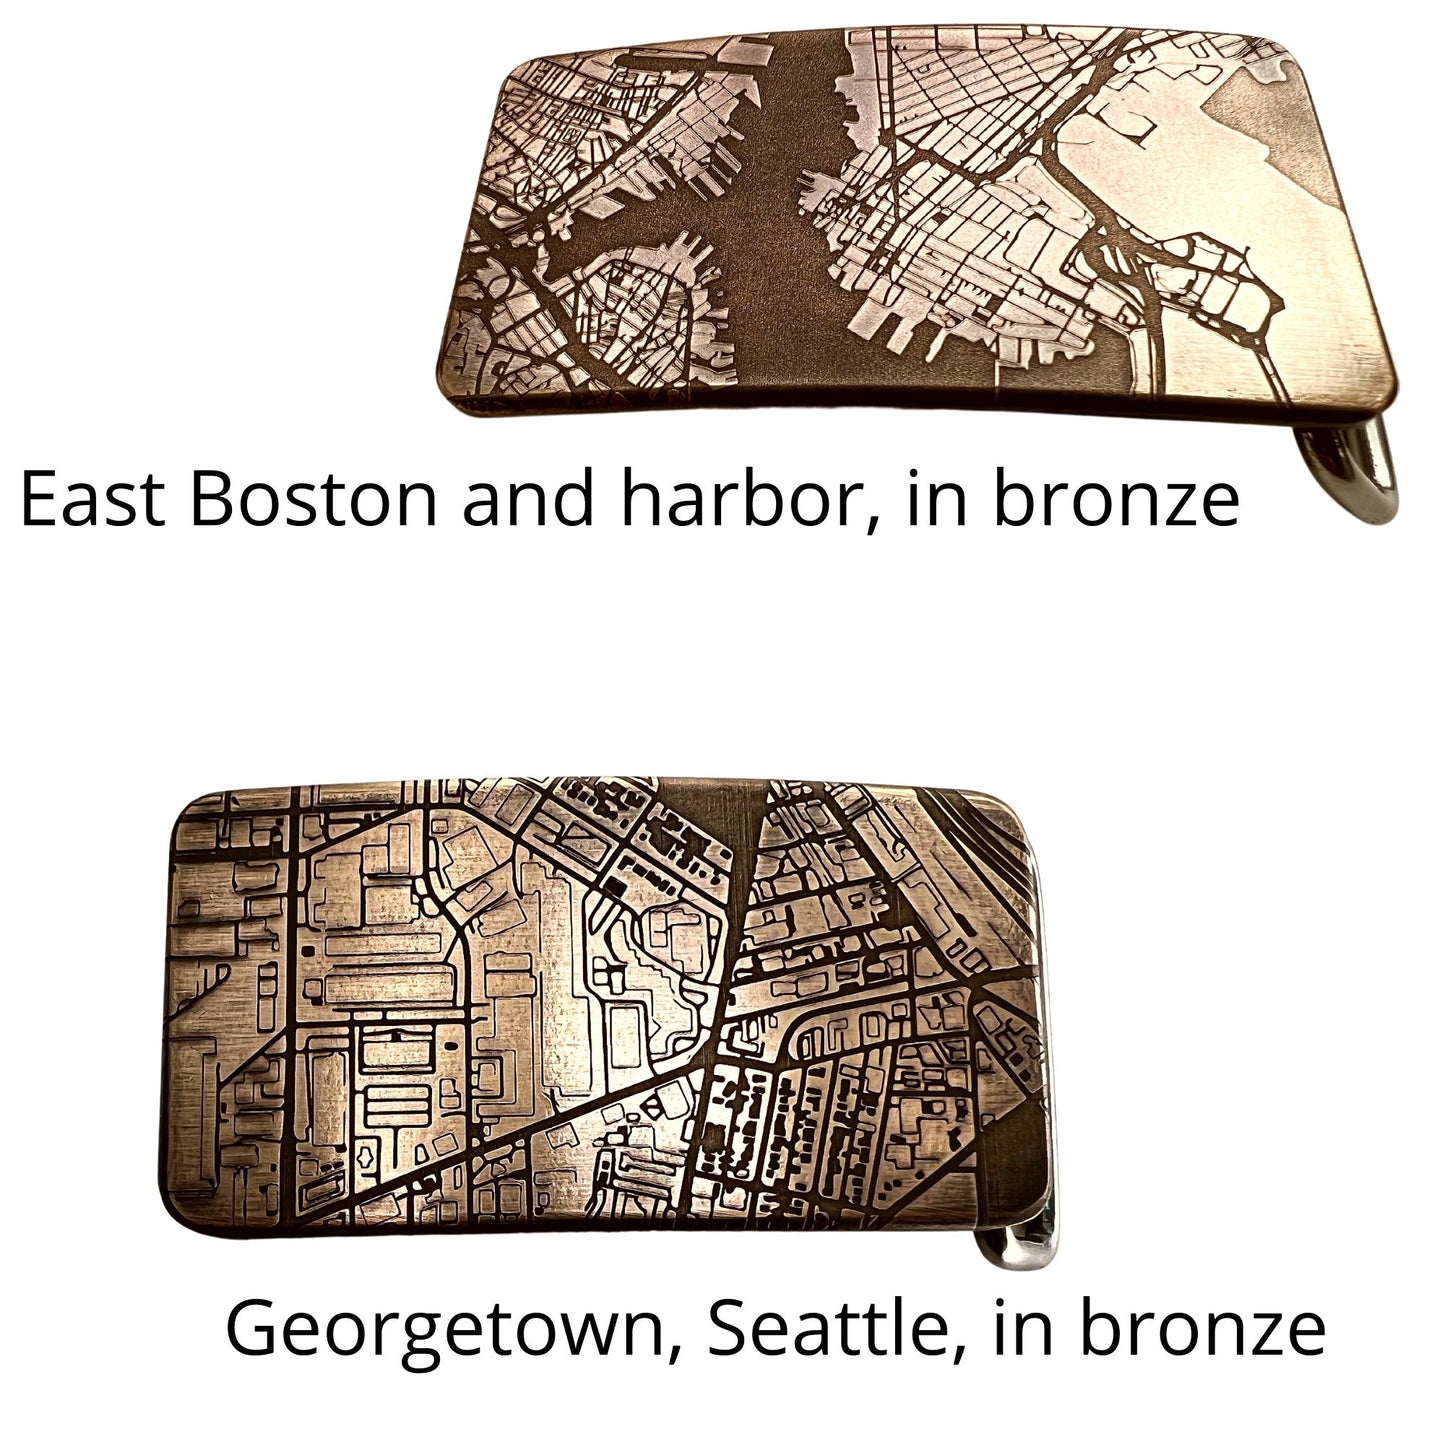 personalized bronze belt buckle with map, custom handmade bronze buckle, engraved belt buckle, elegant bronze belt buckle made in usa